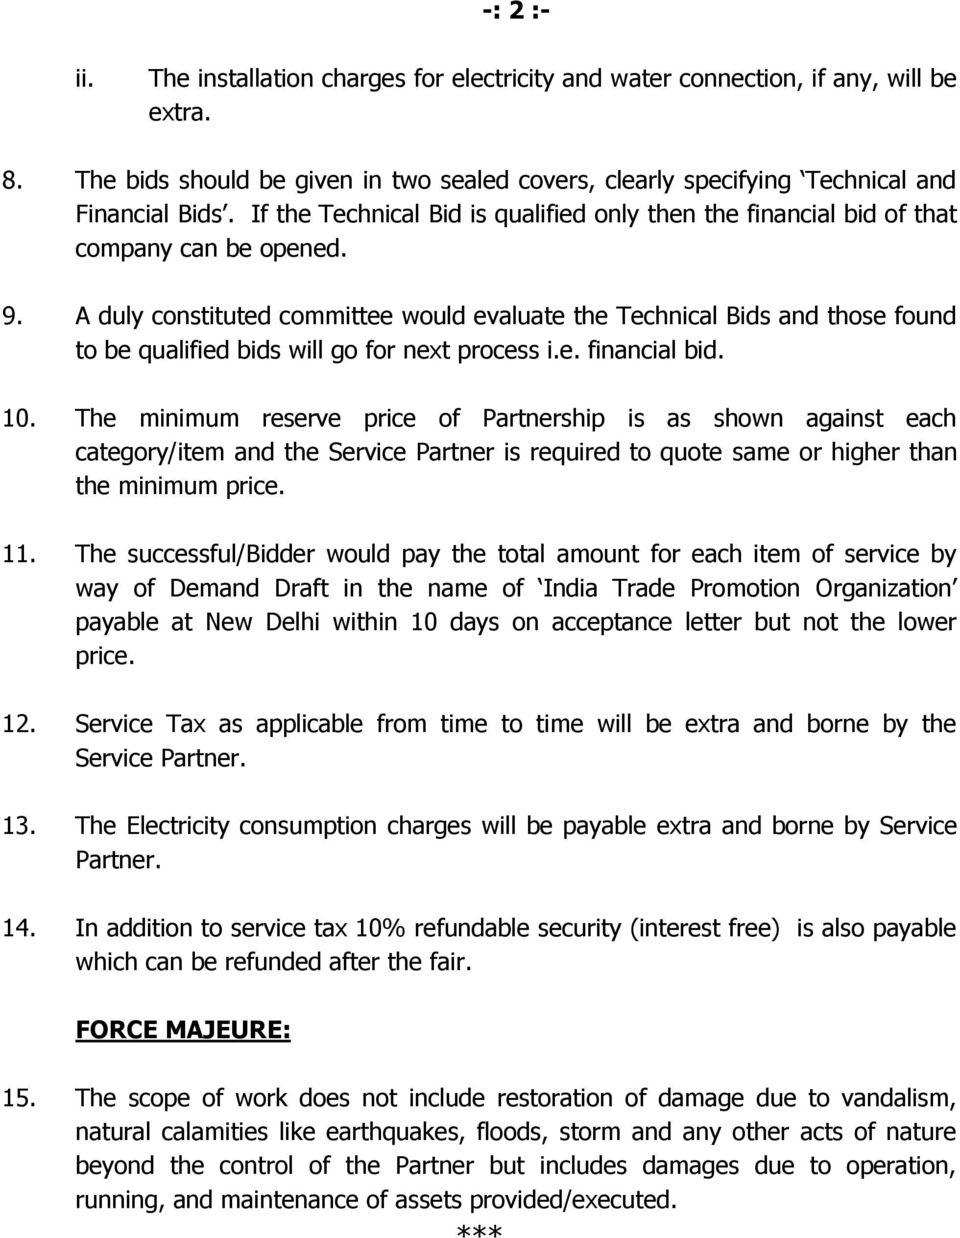 A duly constituted committee would evaluate the Technical Bids and those found to be qualified bids will go for next process i.e. financial bid. 10.